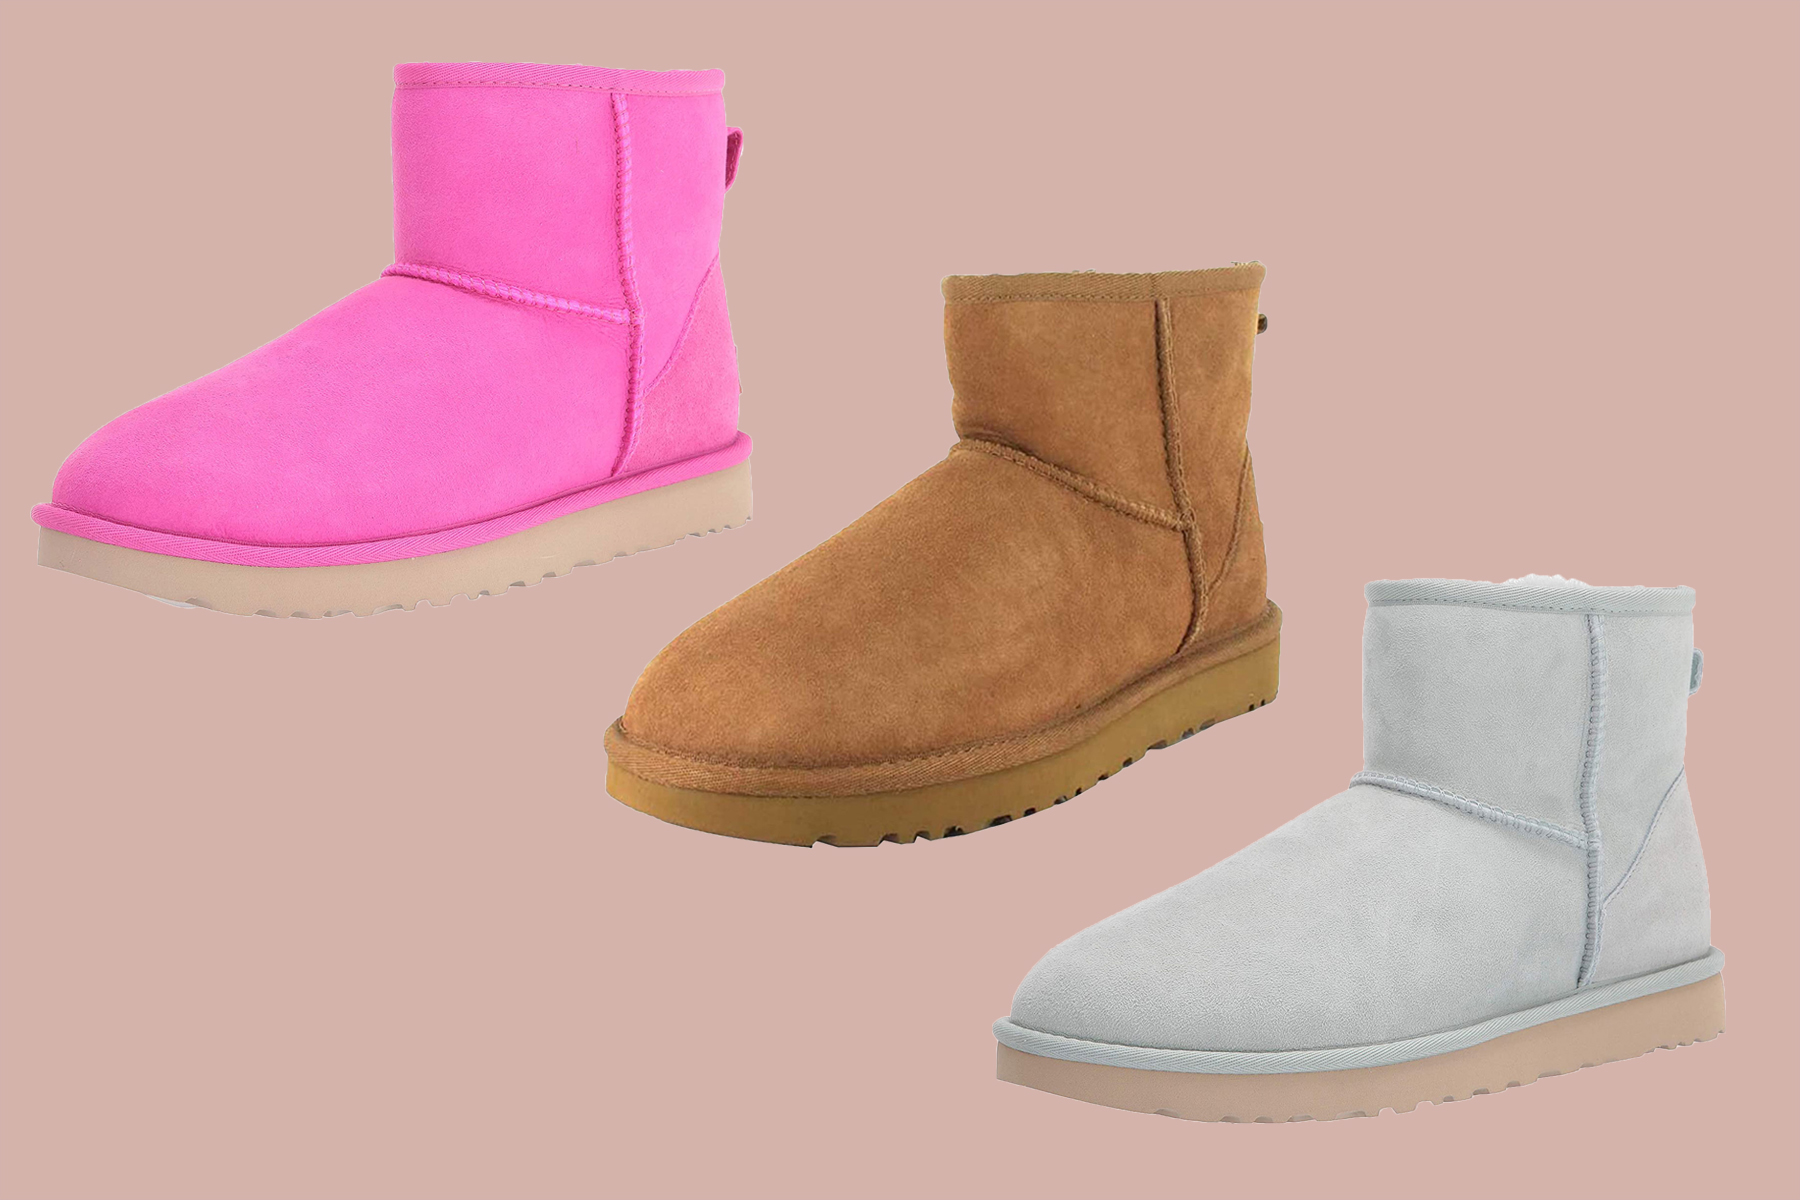 Comfortable and Beloved Ugg Boots Are 